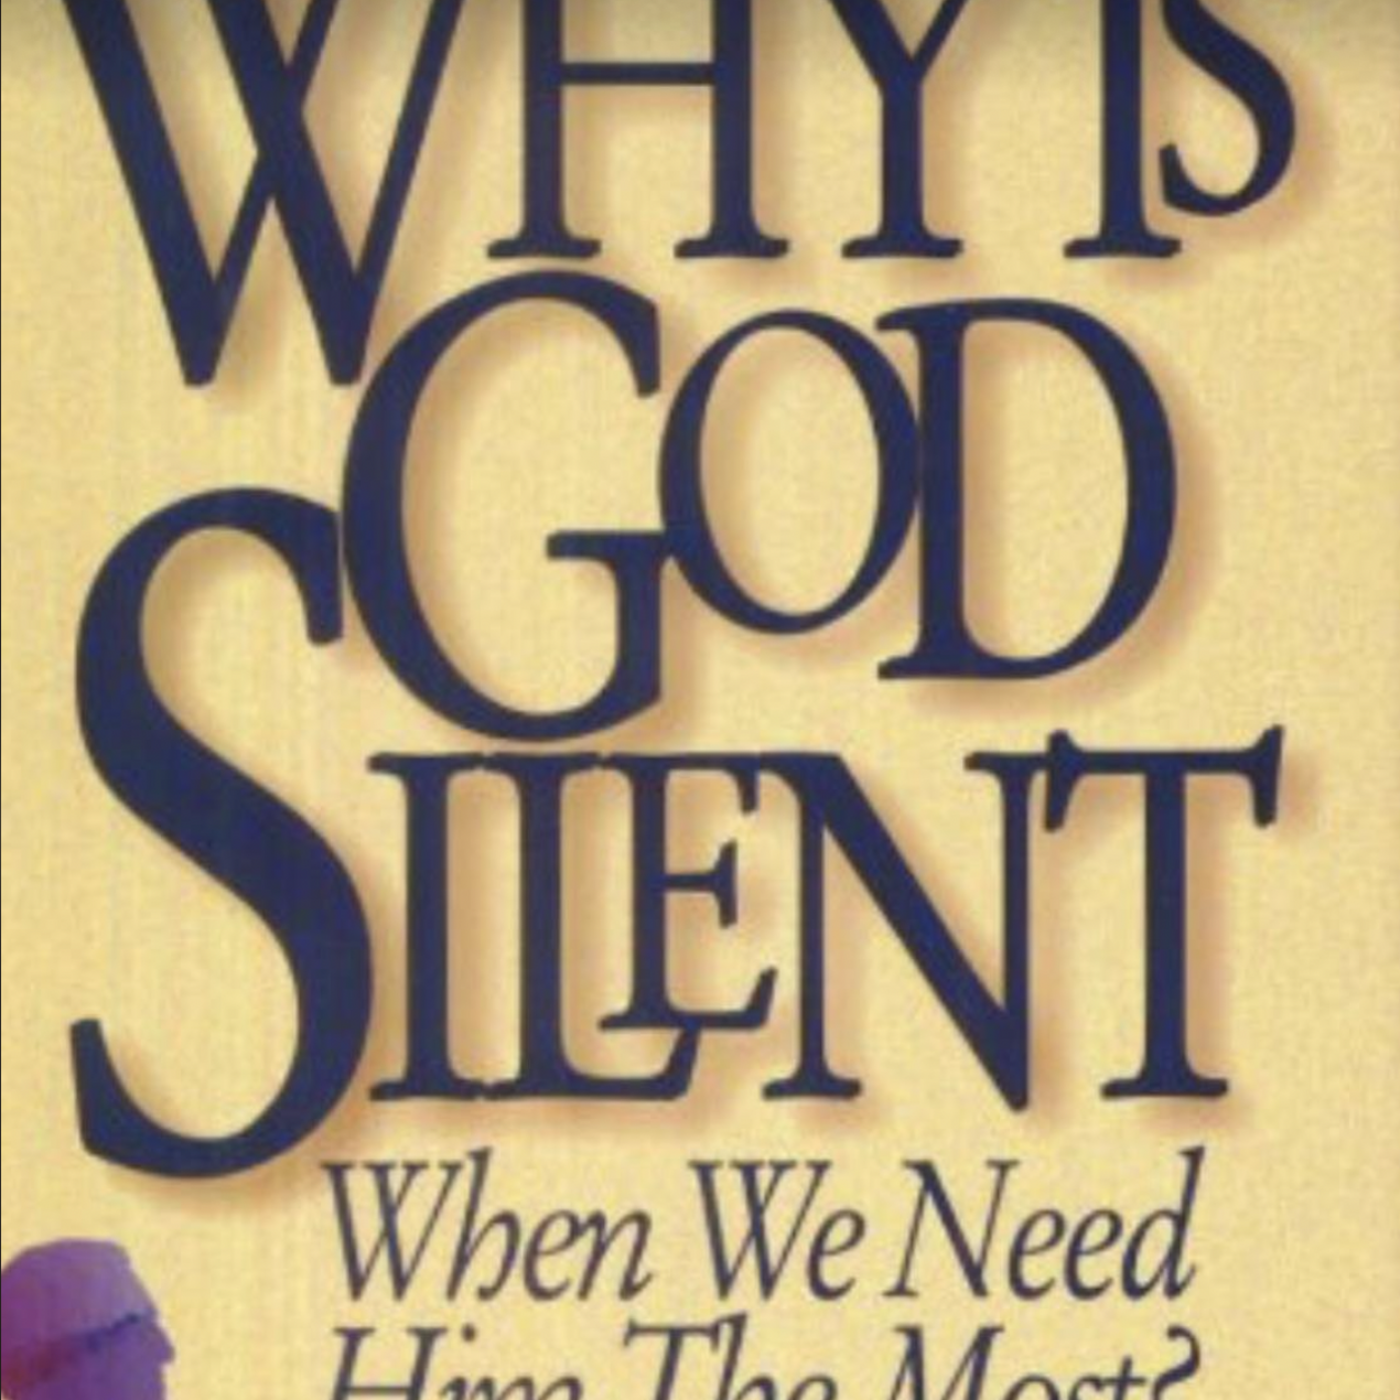 WHY IS GOD SILENT?